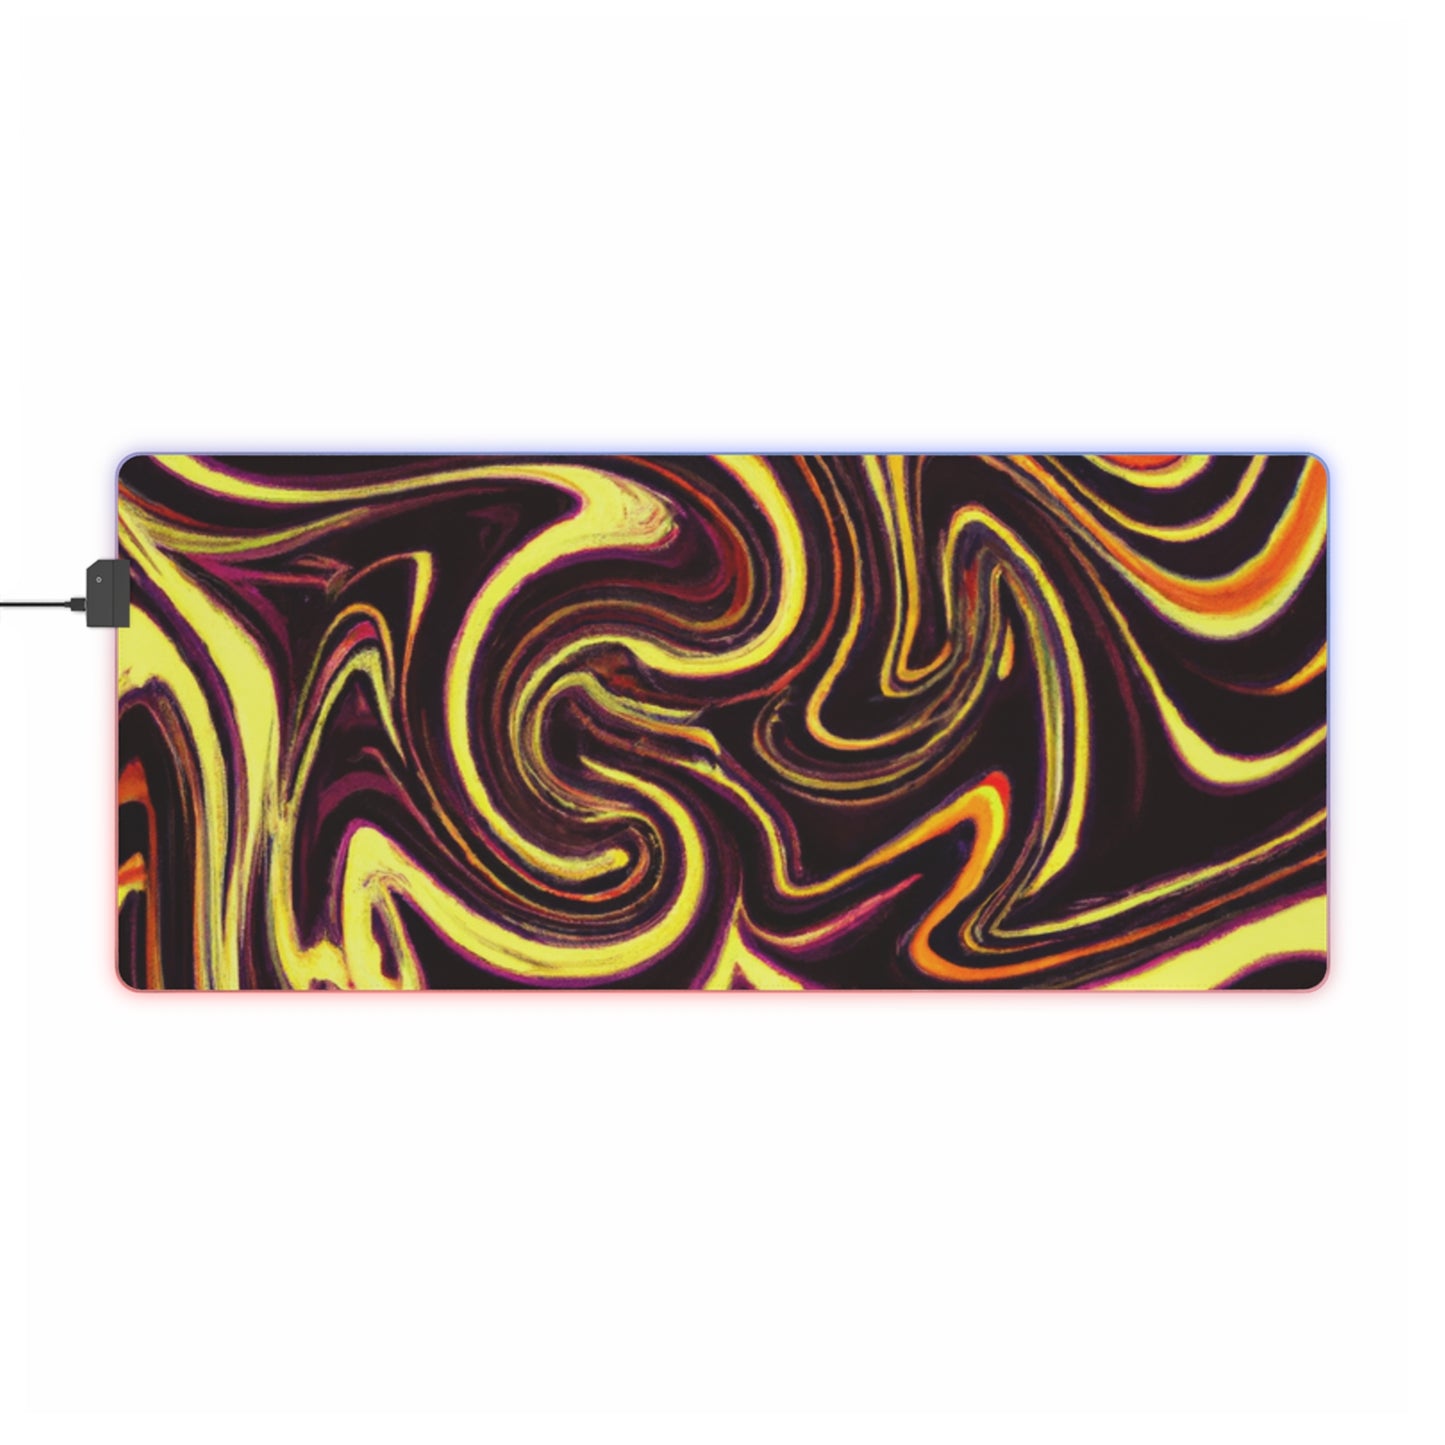 .

Joanie the Jetsetter - Psychedelic Trippy LED Light Up Gaming Mouse Pad